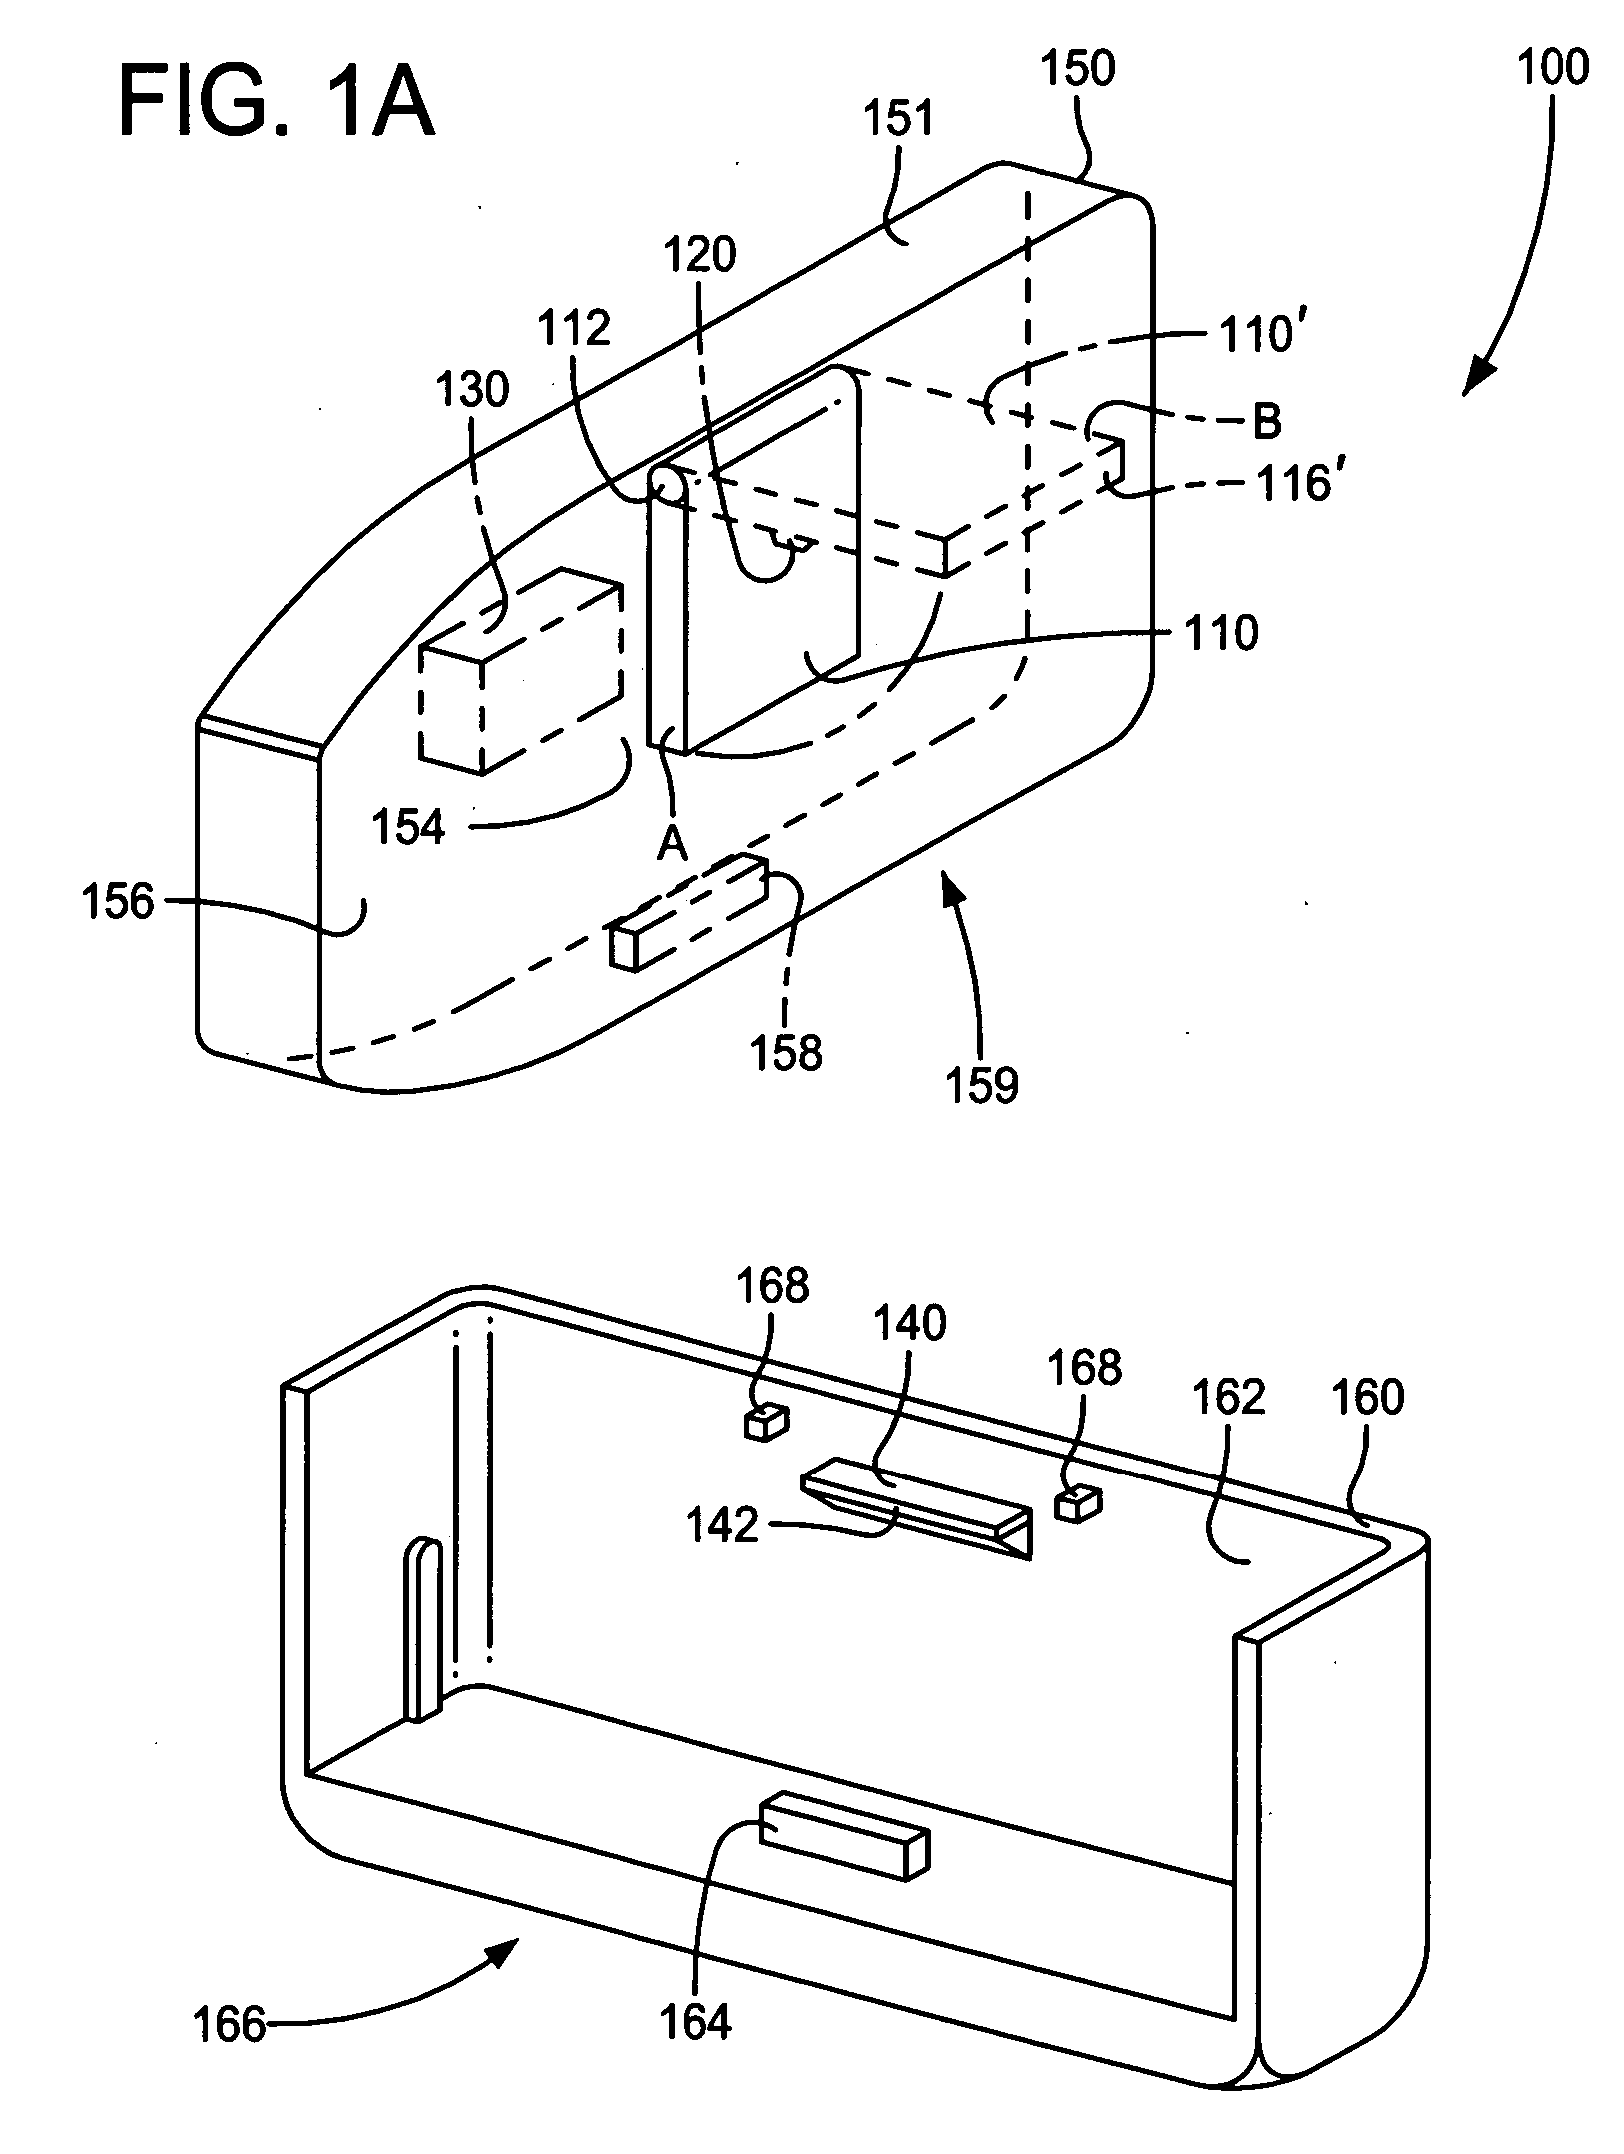 Latch apparatus for portable electronic devices